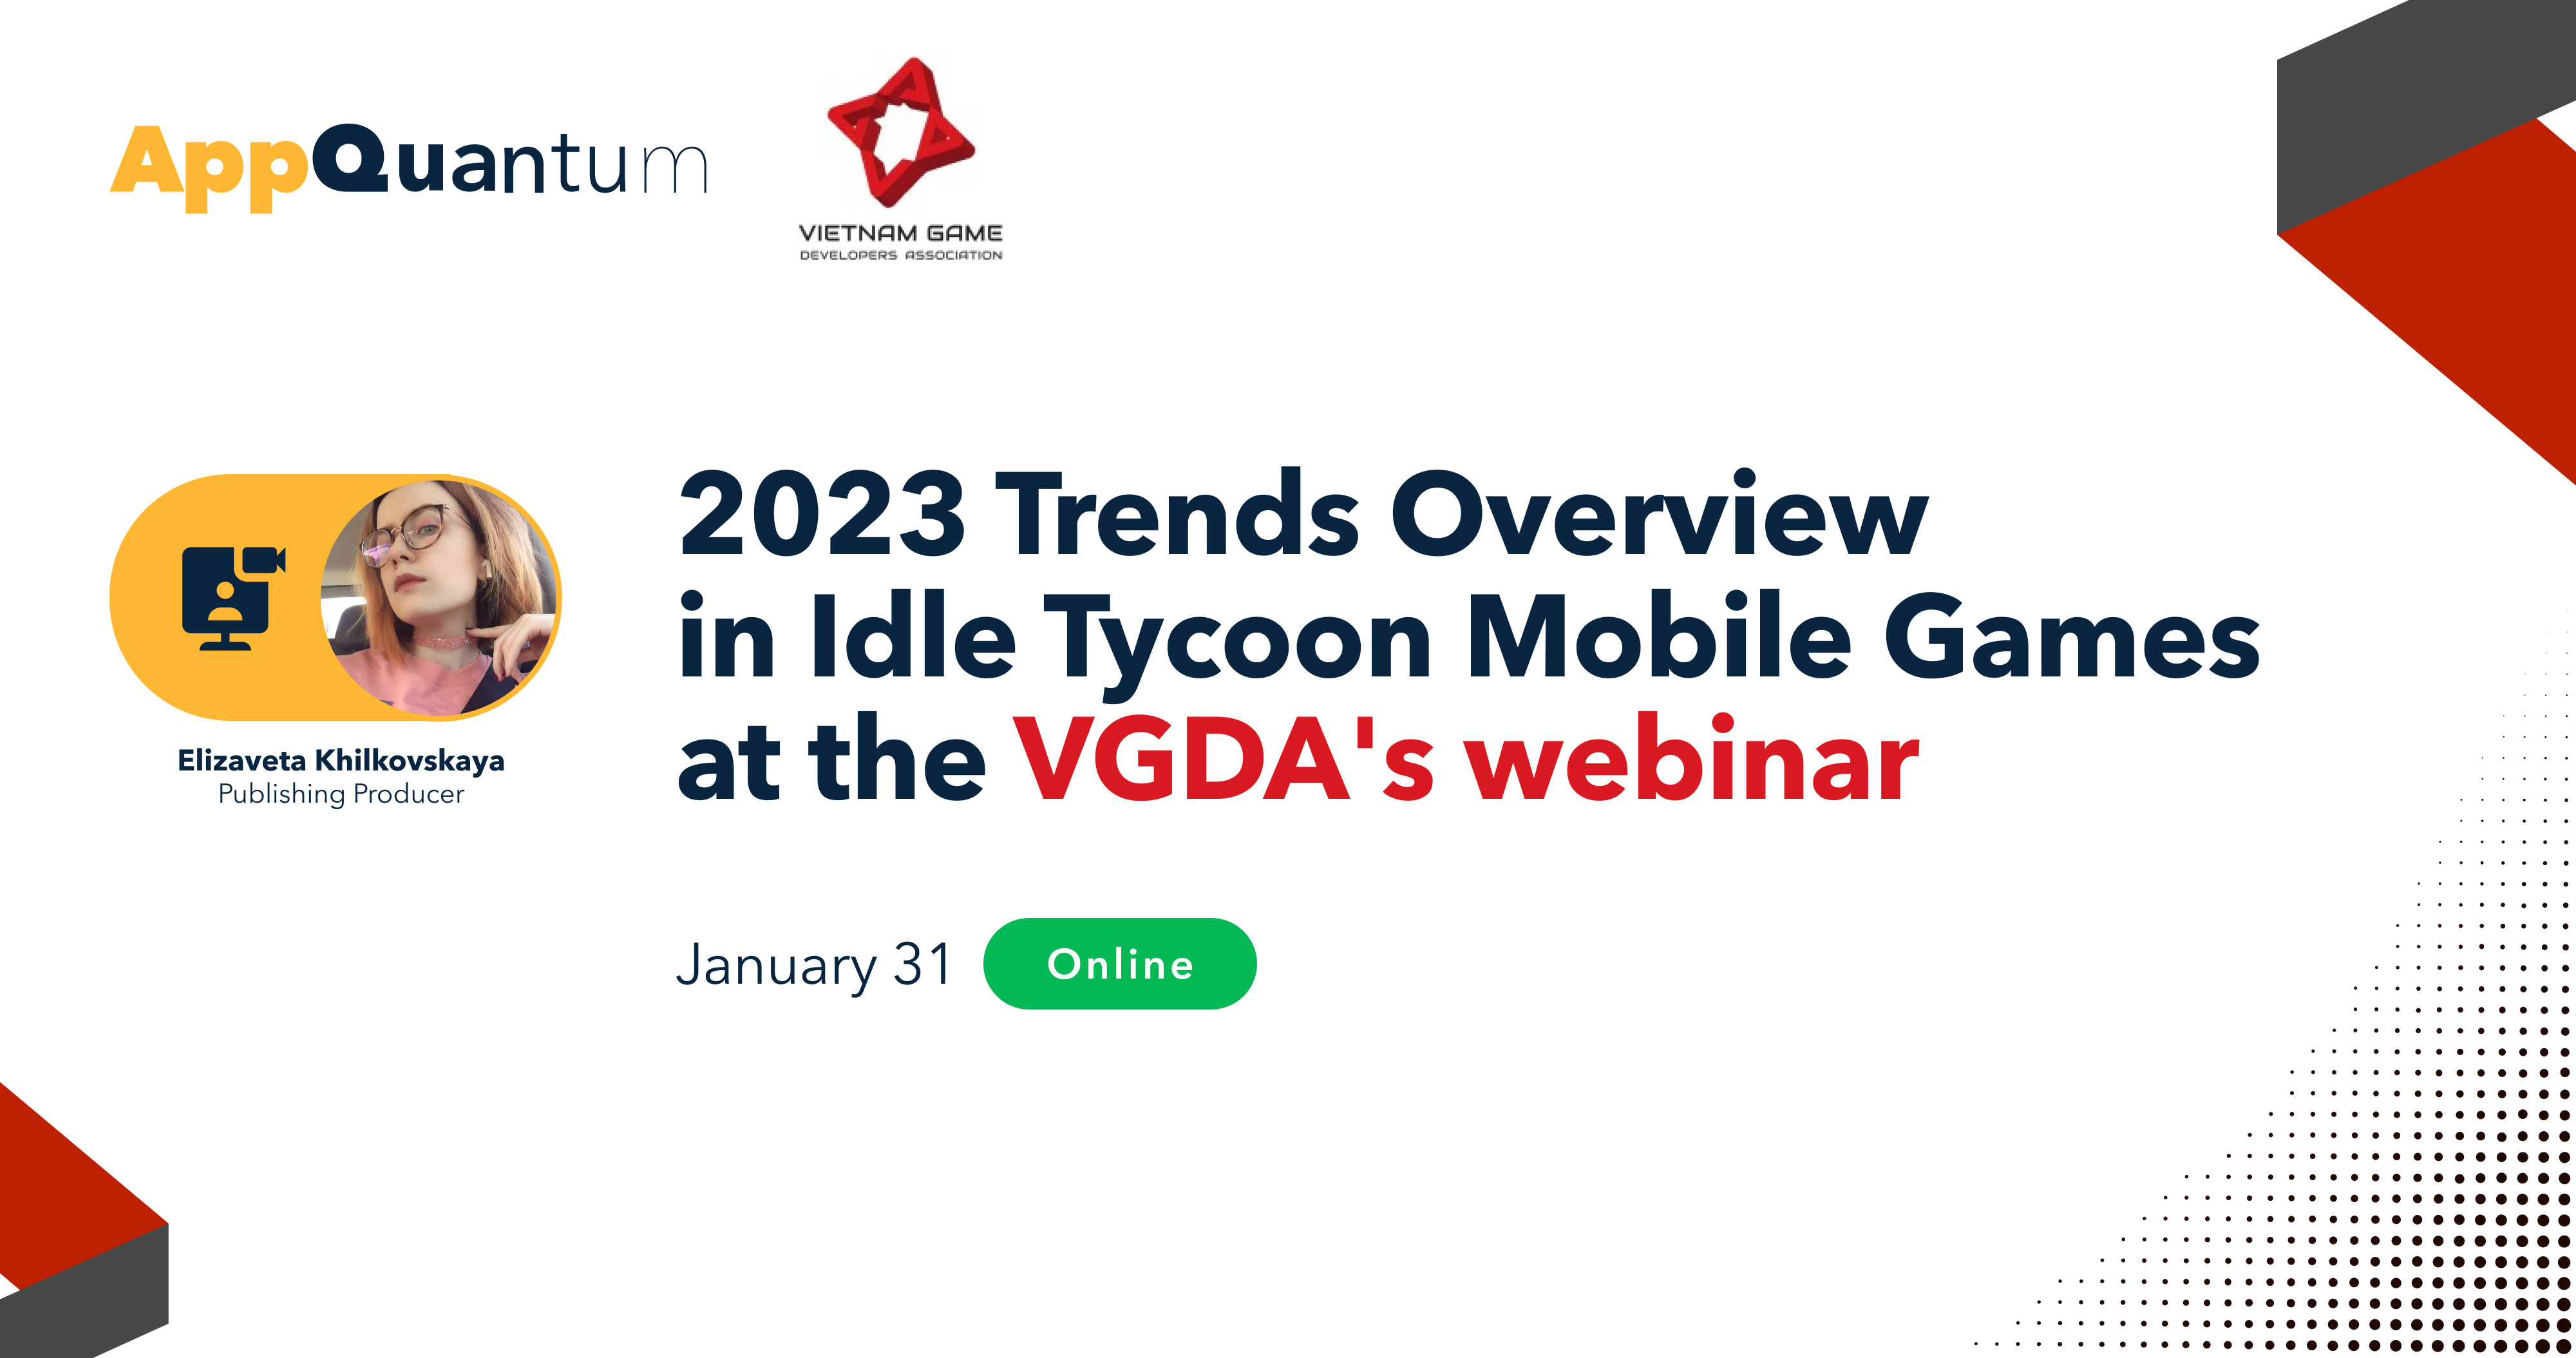 2023 Trends Overview in Idle Tycoon Mobile Games at the VGDA's webinar